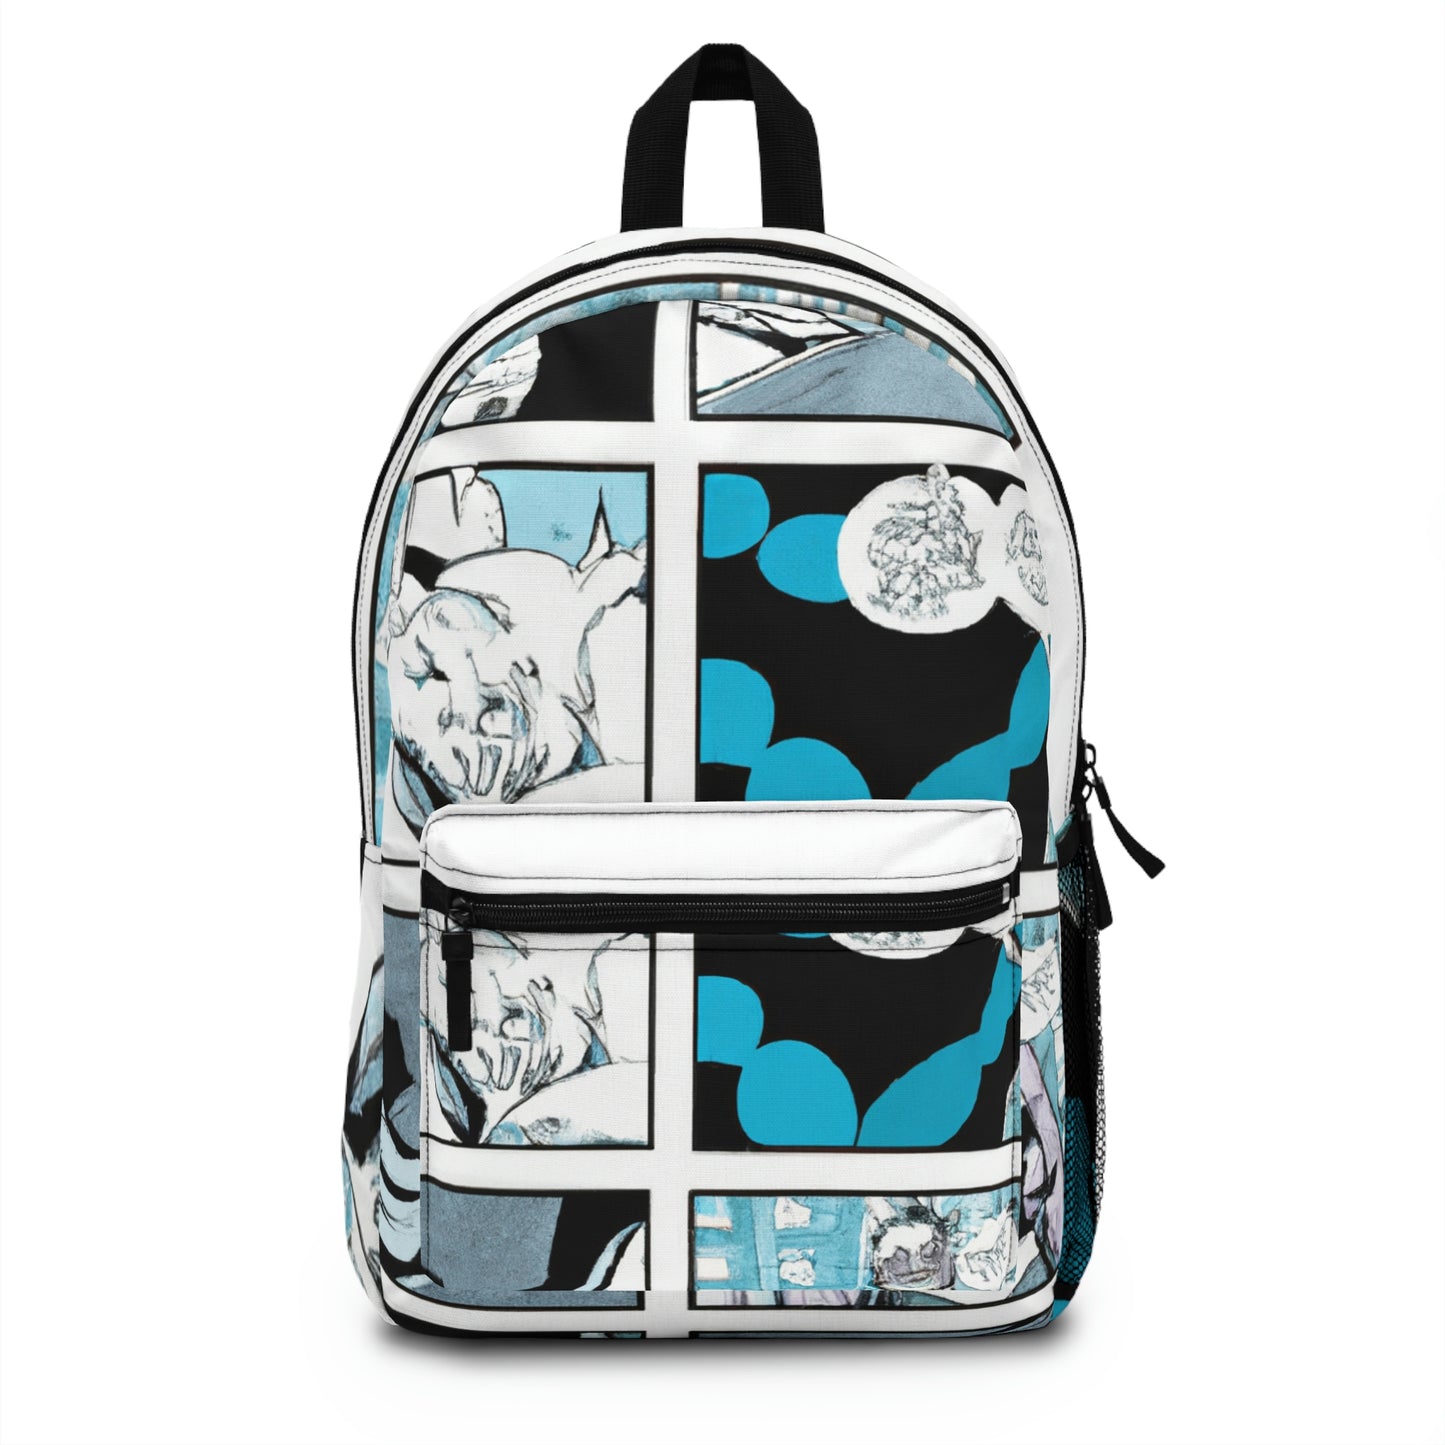 Captain Protector - Comic Book Backpack